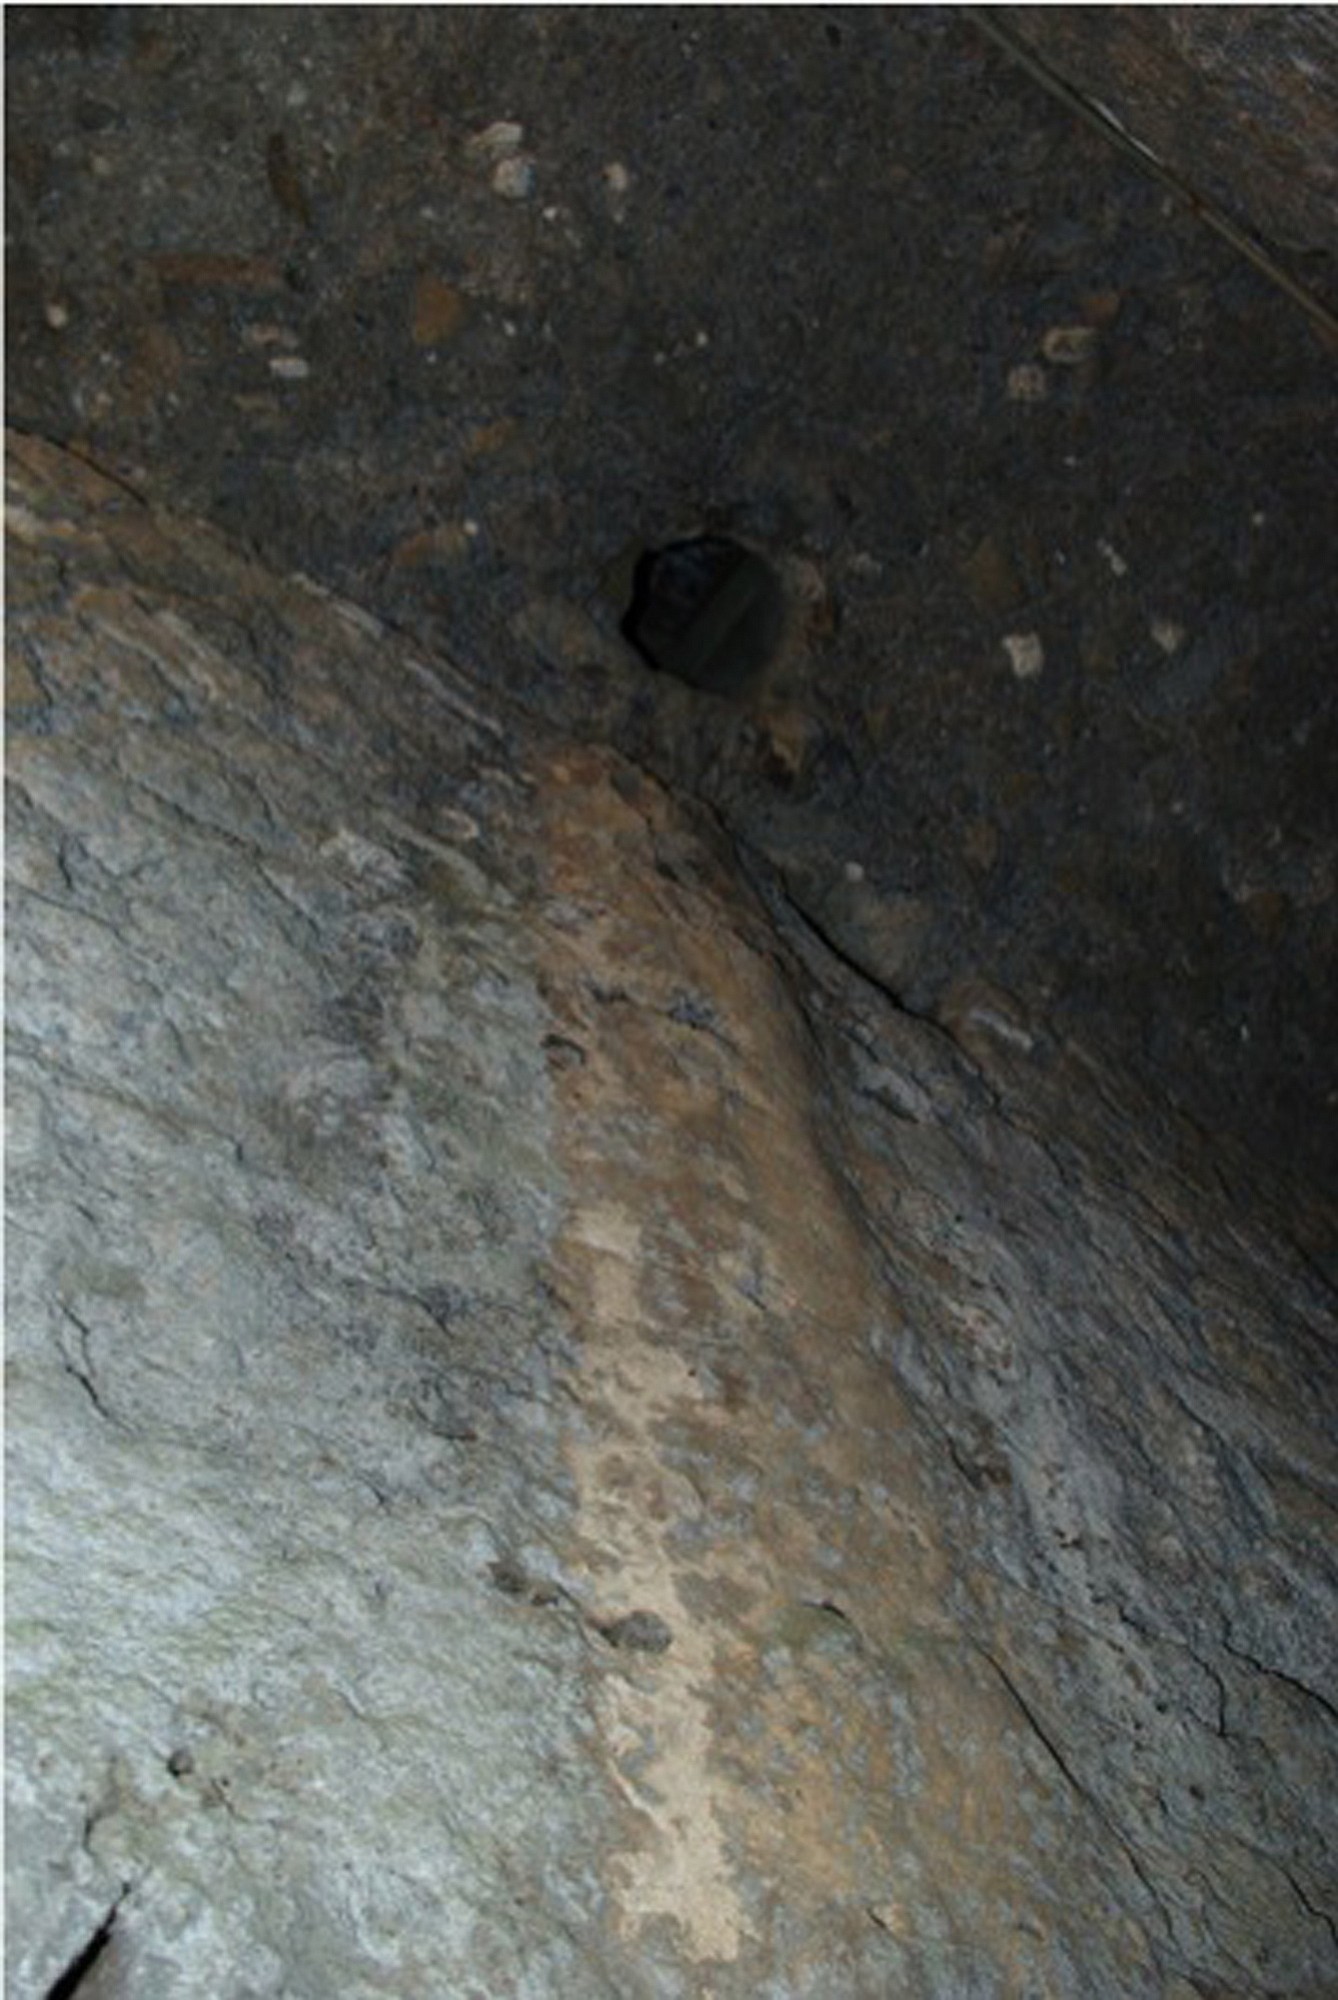 This latrine entry shaft into a sewer shows calcium phosphate build-up on the side. Archaeologists picking through latrines, sewers, cesspits and trash dumps at Pompeii and Herculaneum have flushed out tantalizing clues to what appears to be a varied diet in those ancient Roman cities destroyed in 79 A.D. by the eruption of Vesuvius.